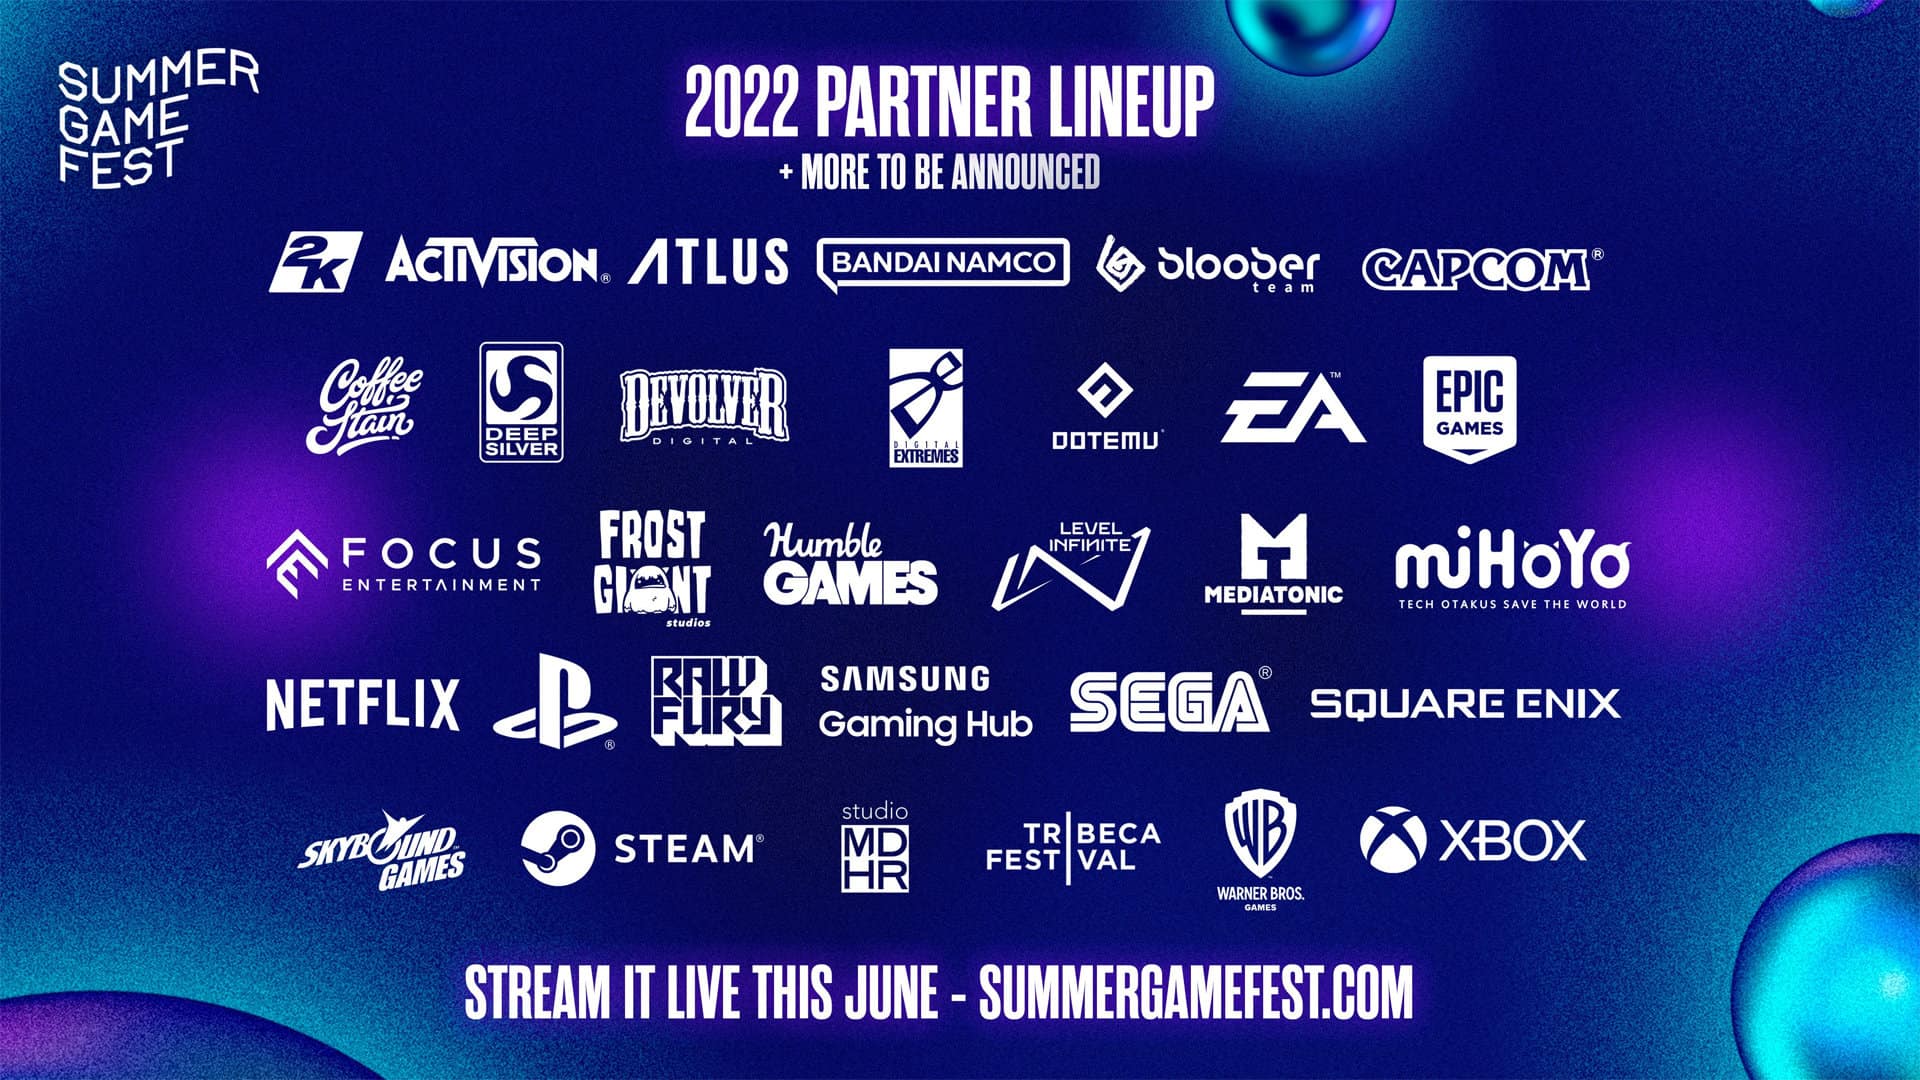 Summer Game Fest promises “more than 30” partners showcasing at the event